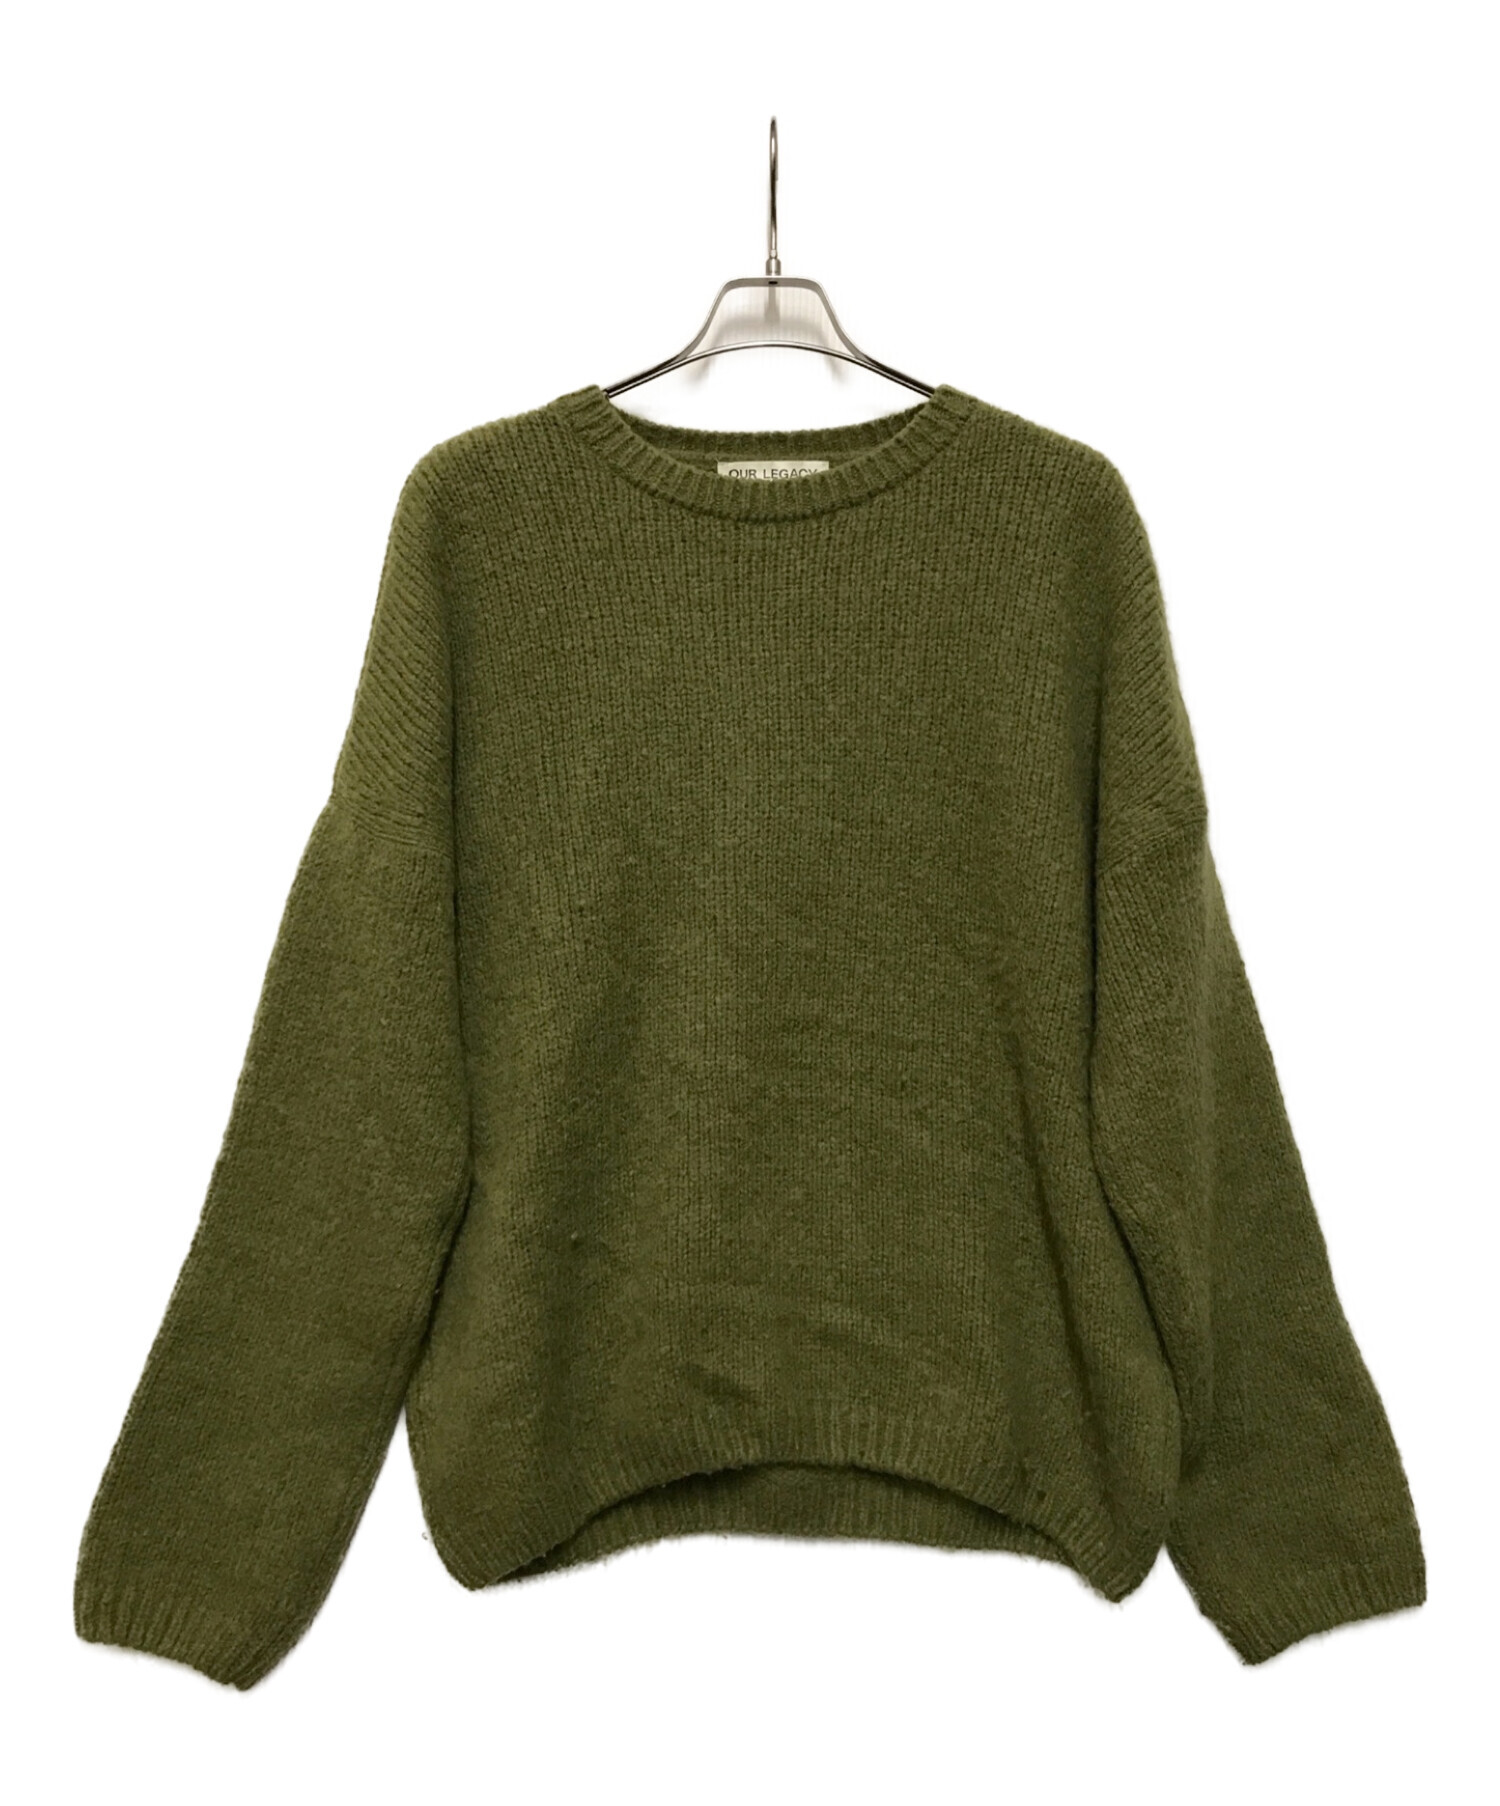 popove(美品) OUR LEGACY popover knit 48 - トップス